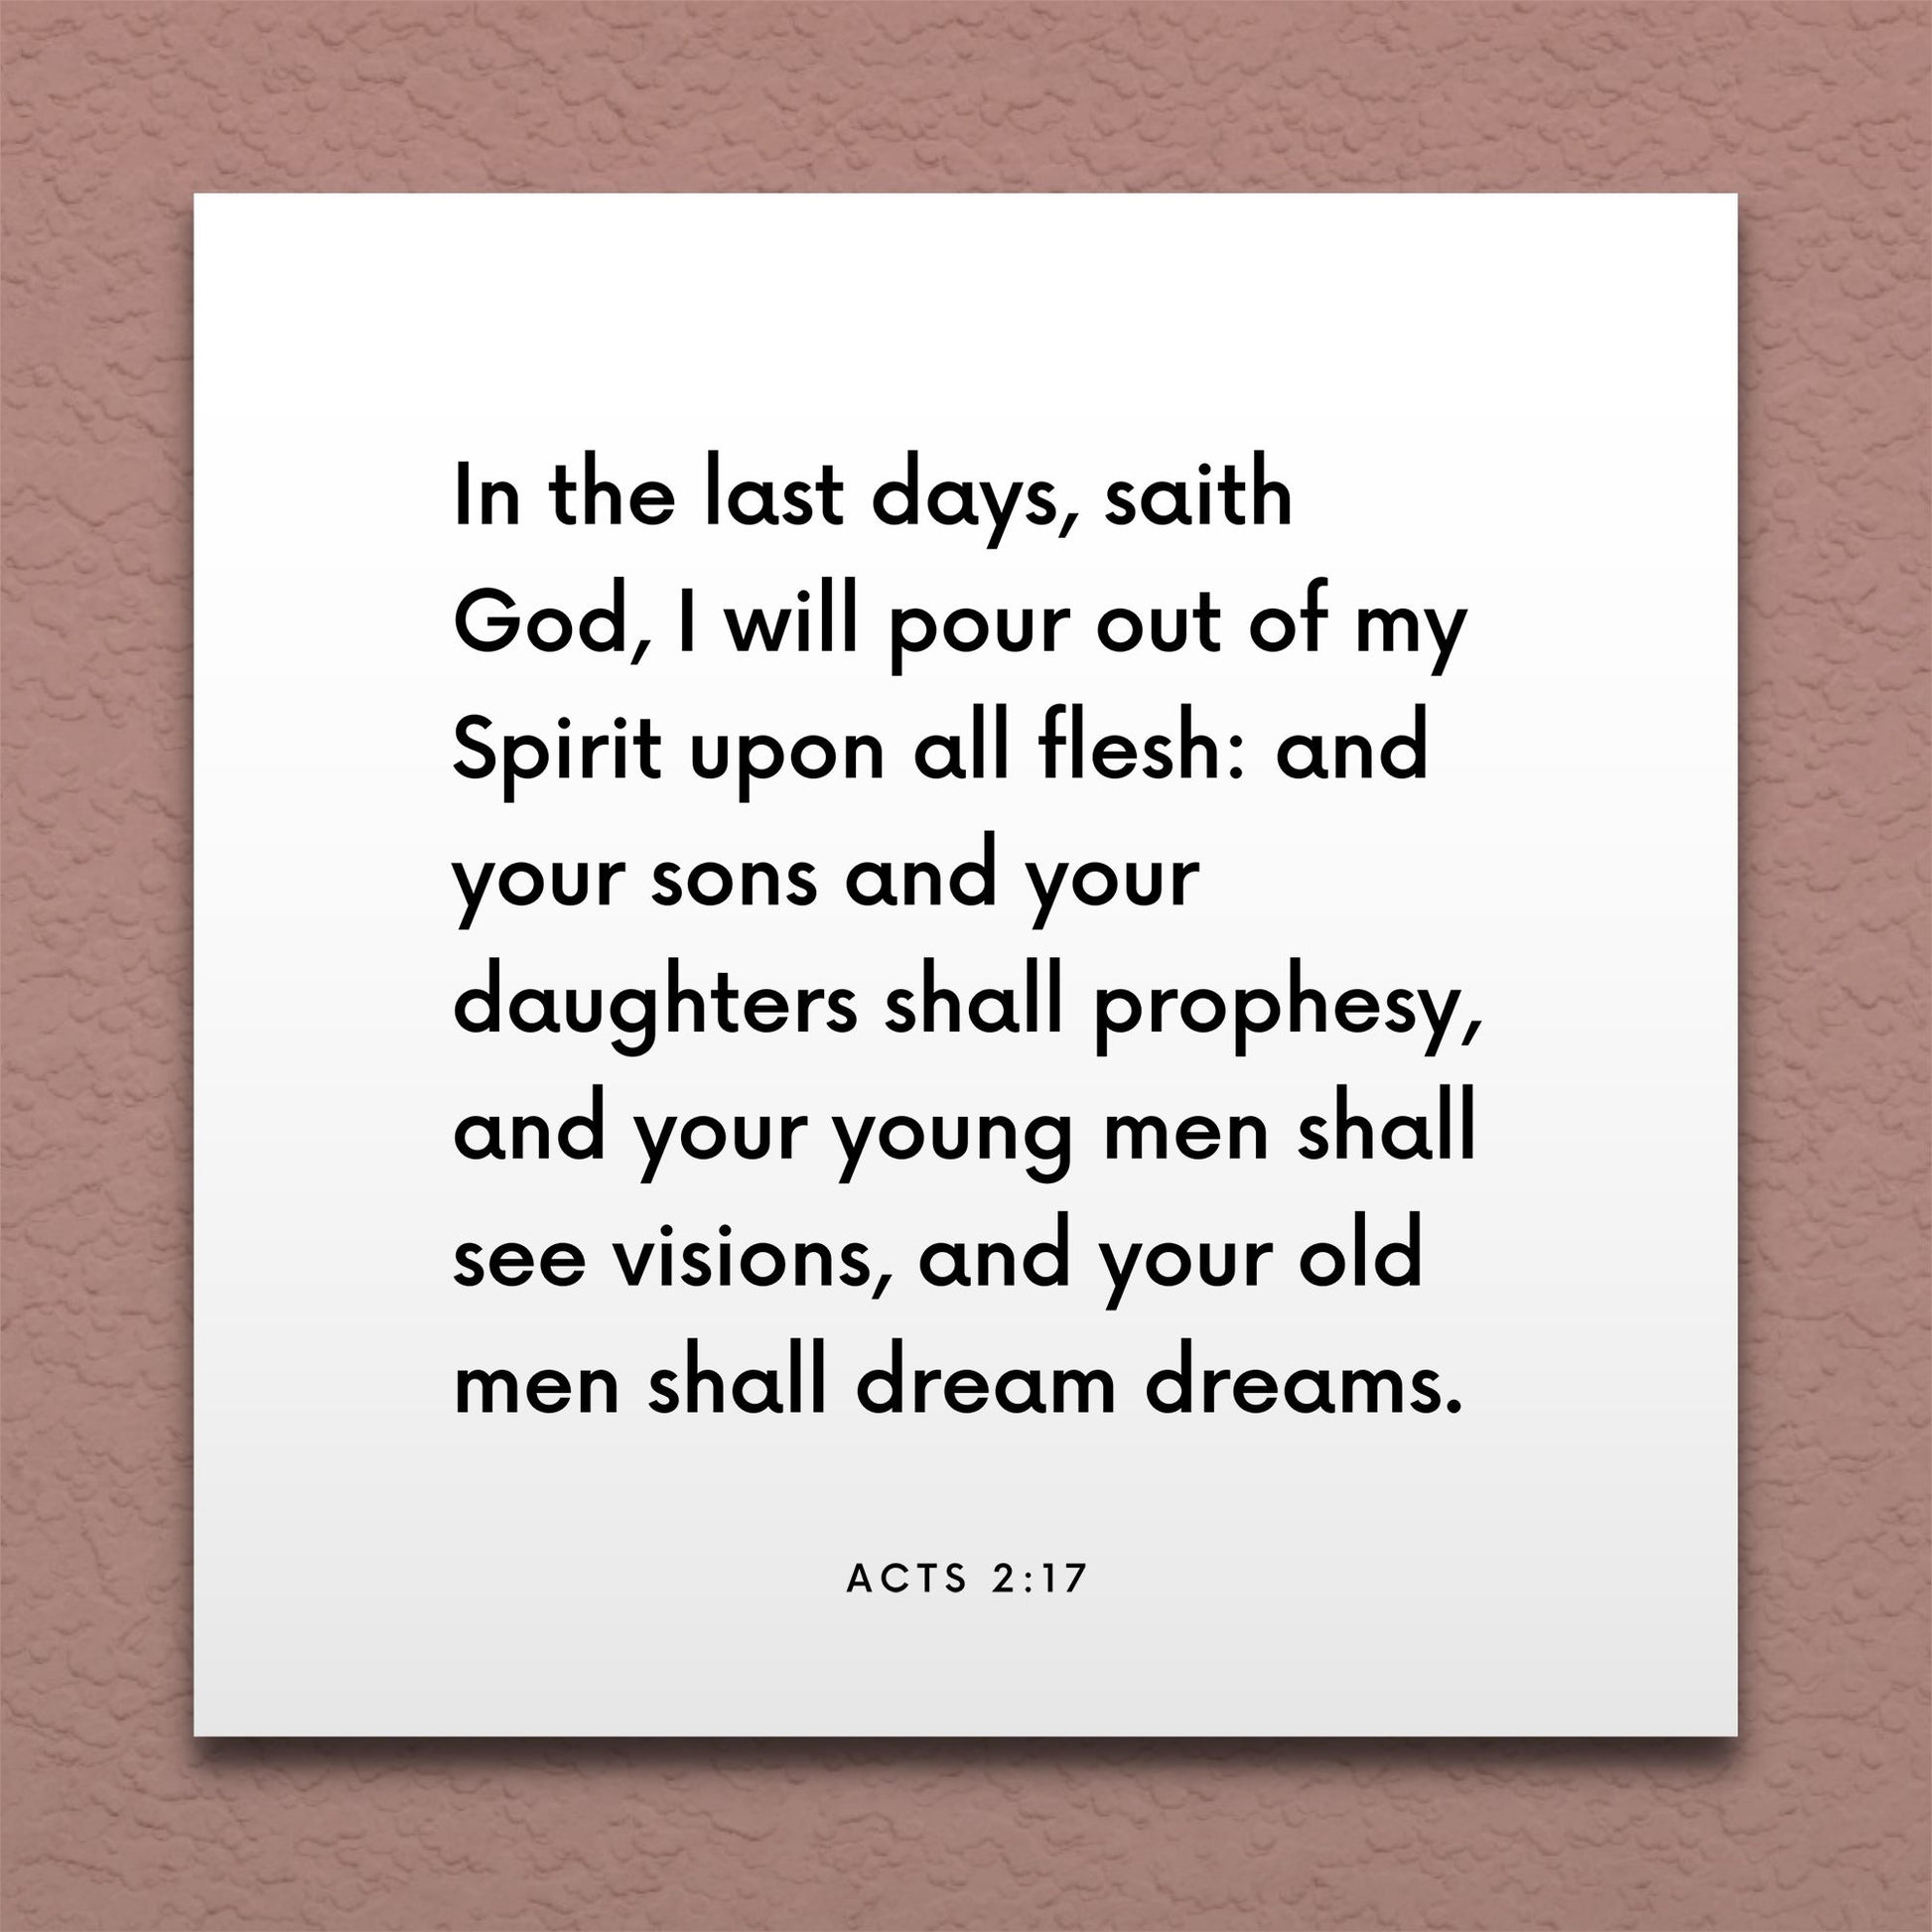 Wall-mounted scripture tile for Acts 2:17 - "In the last days, I will pour out my spirit upon all flesh"